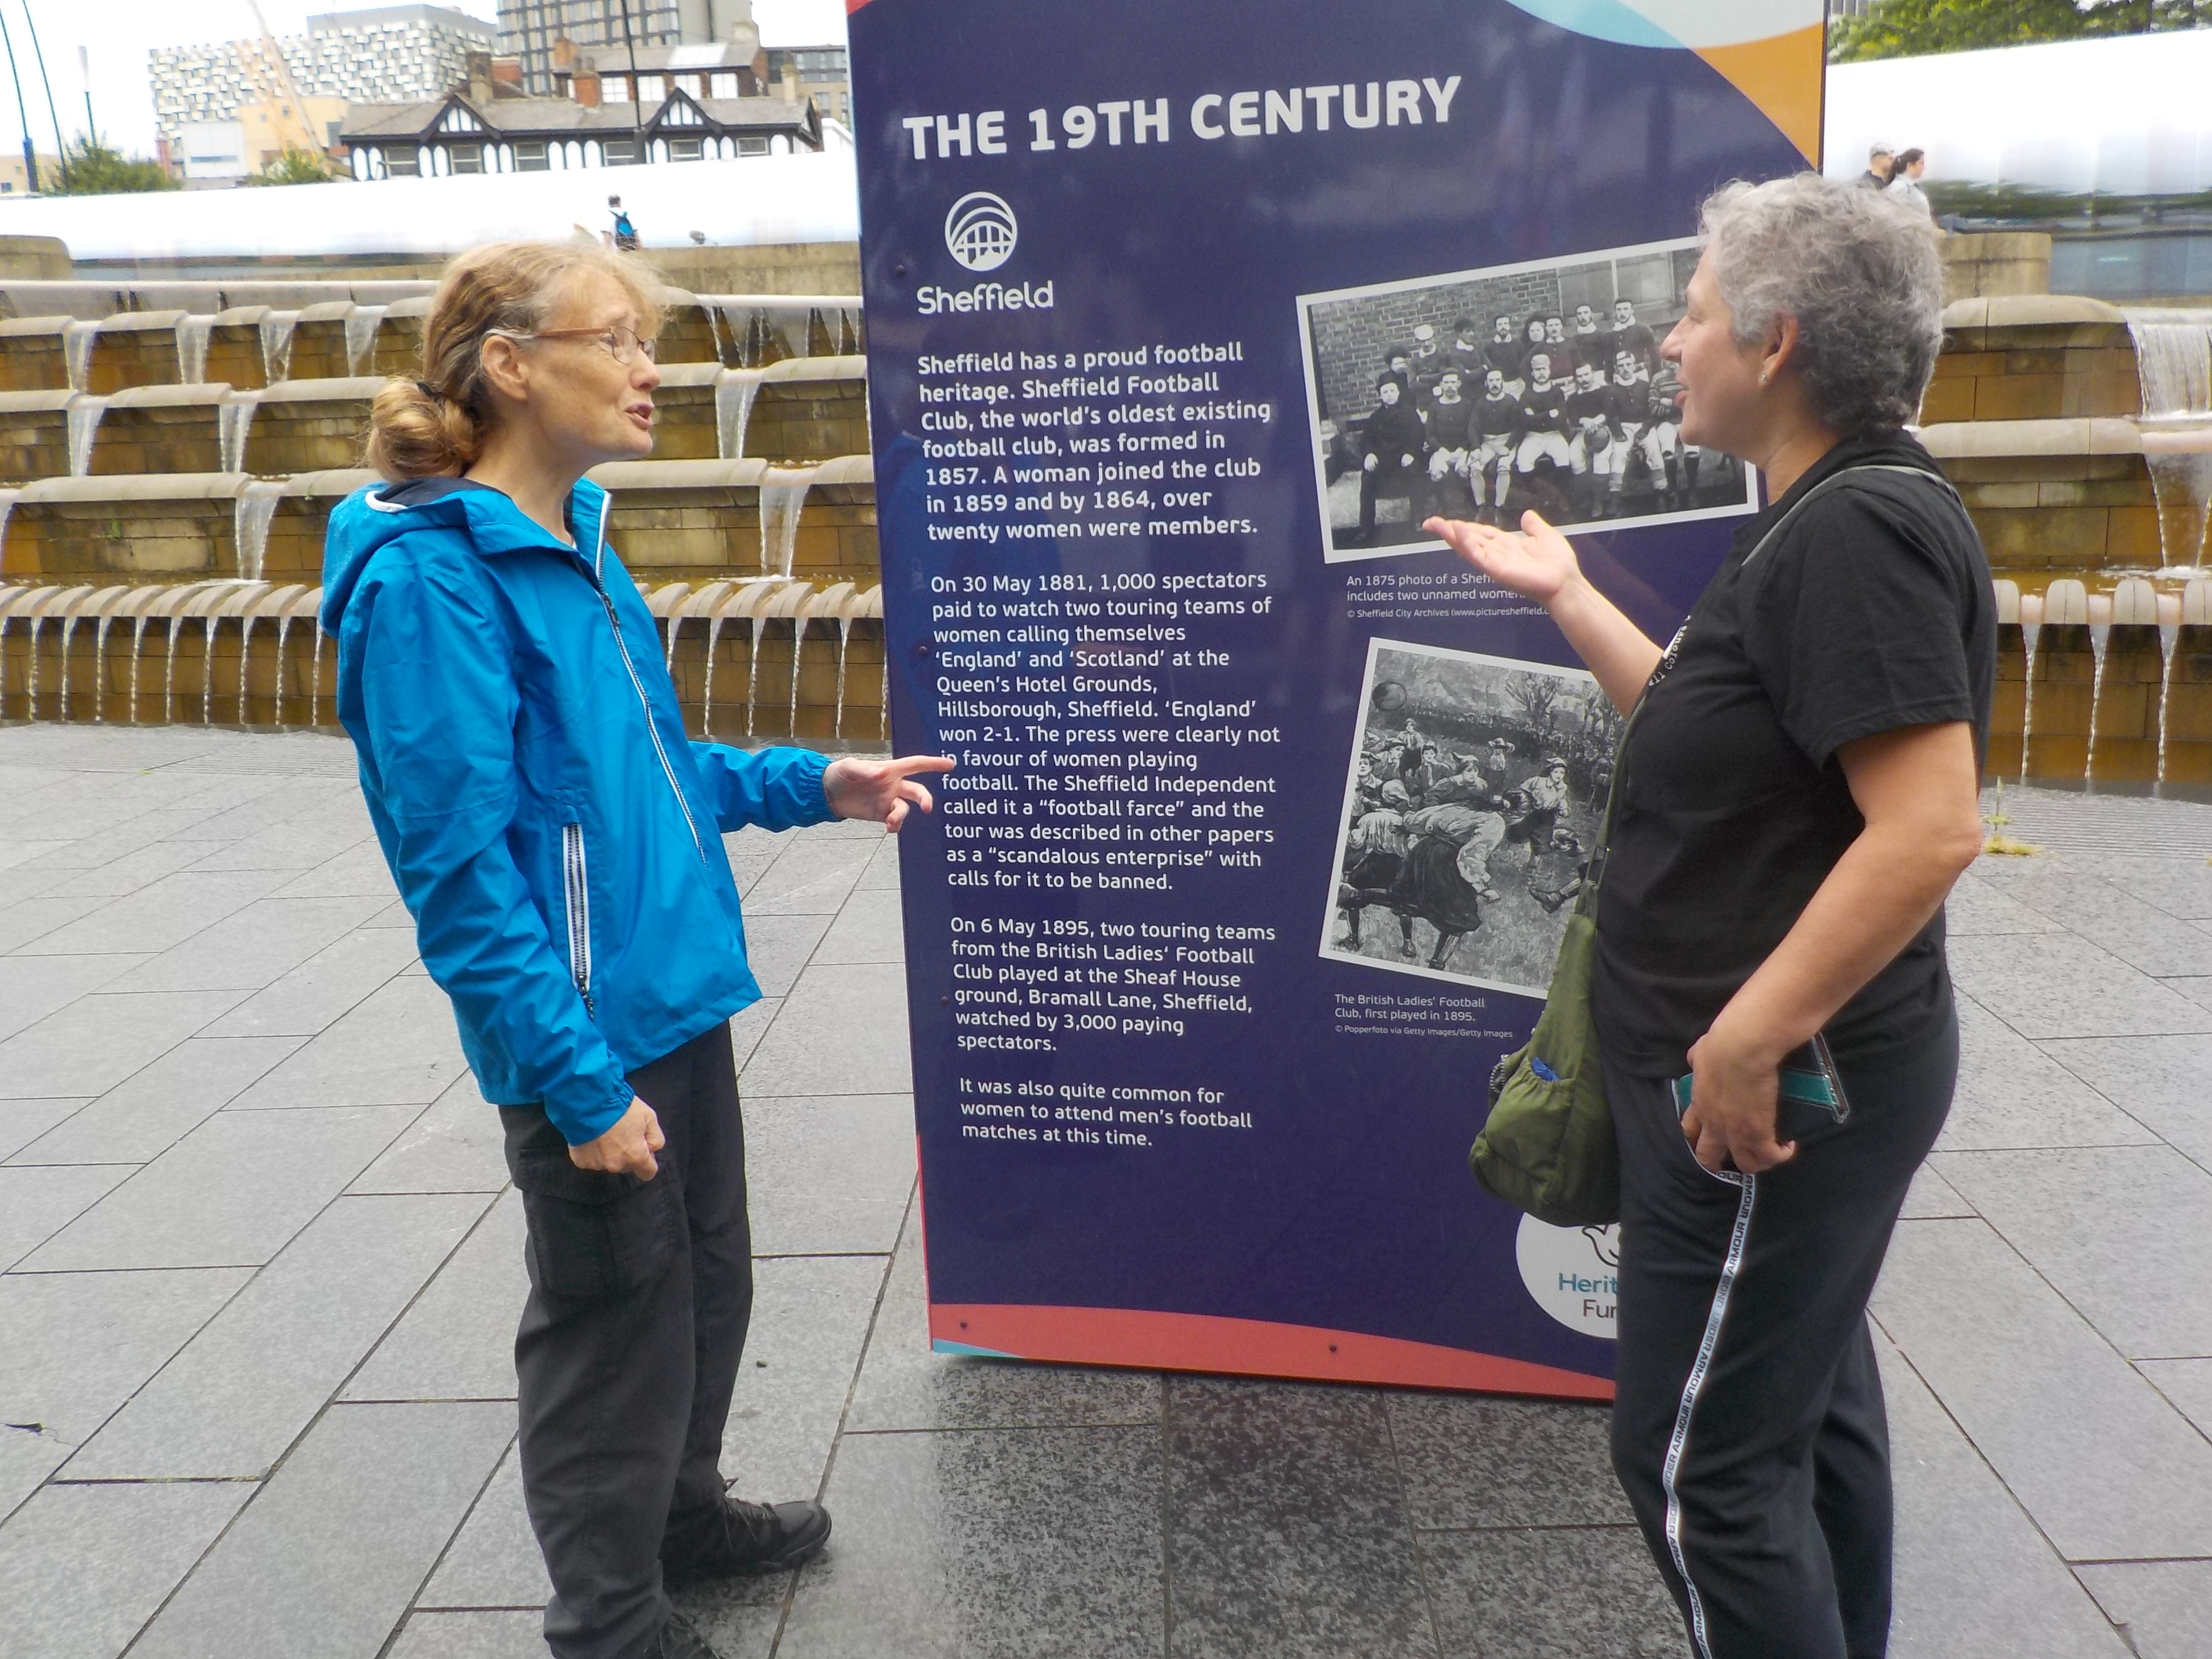 Sheffield women's football history monolith 1 - Sheffield women's football history monolith 1 outside Sheffield station with Ruth Johnson and Elaine Williams.